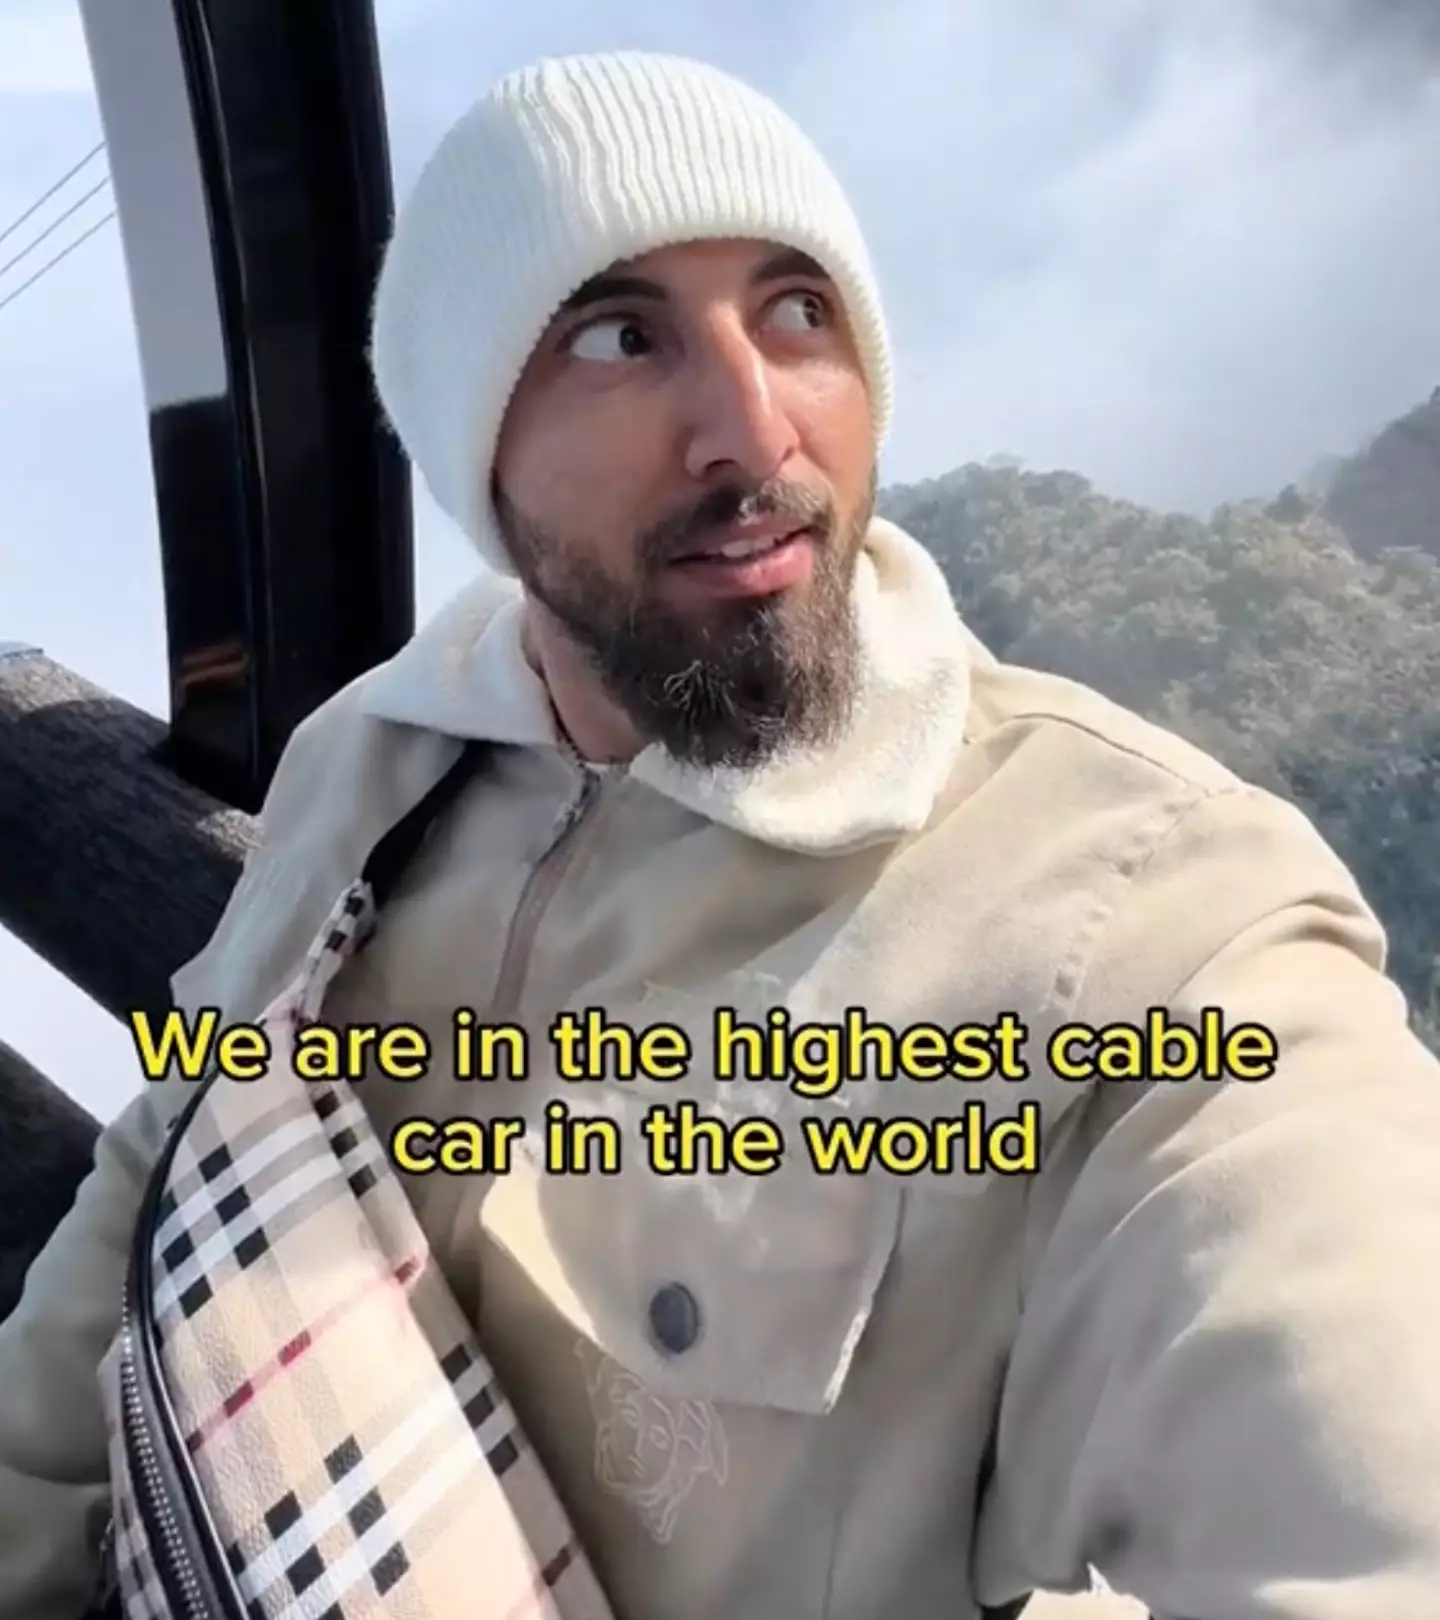 A group of tourists were trapped in a cable car for hours.